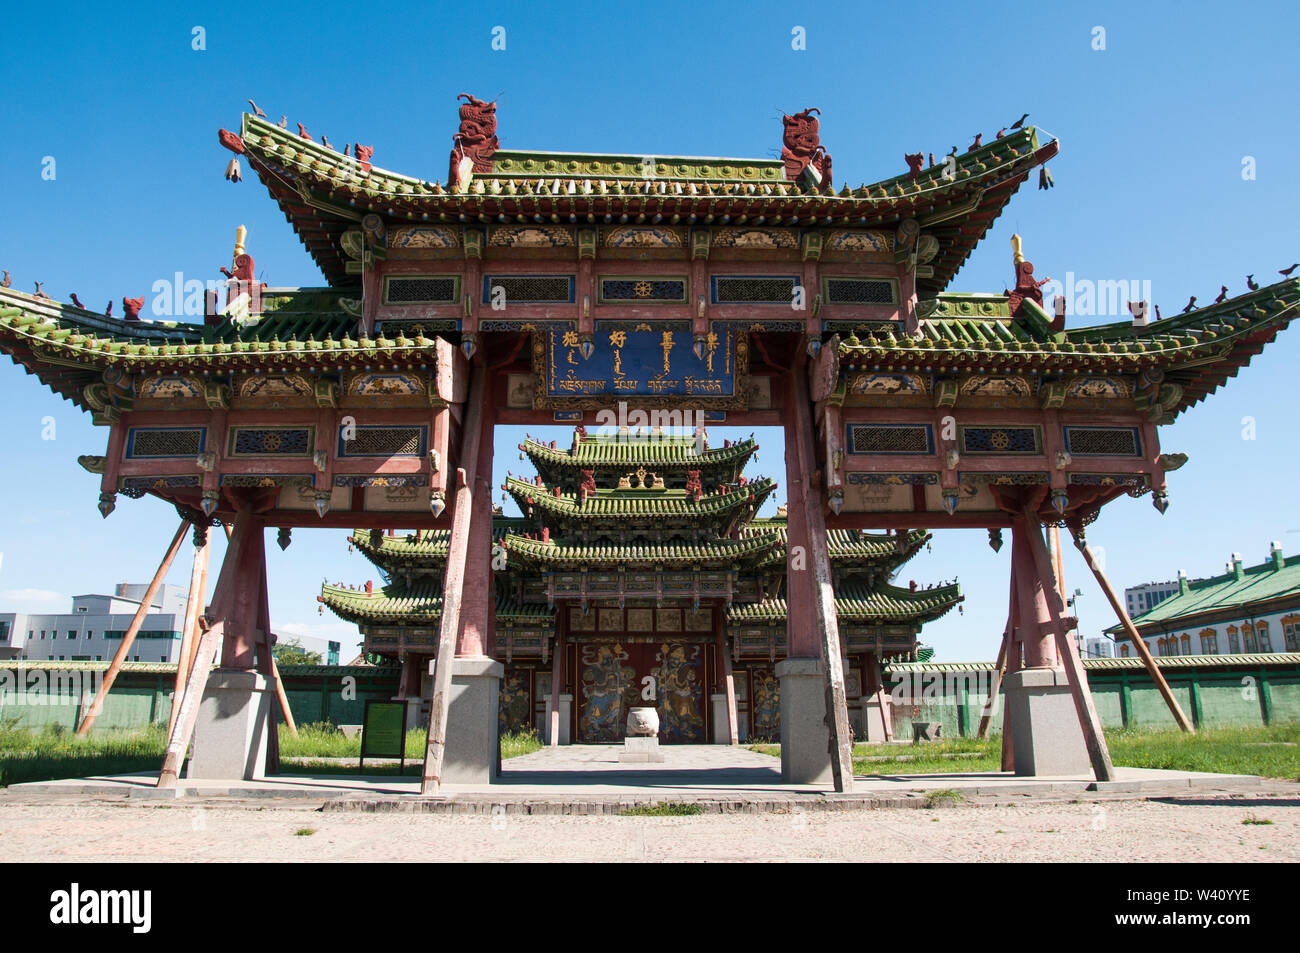 Manchu-style gates and pavilions of the Winter Palace of the Bogd Khan, the last Mongolian king, in Ulaanbaatar (Ulan Bator) Stock Photo